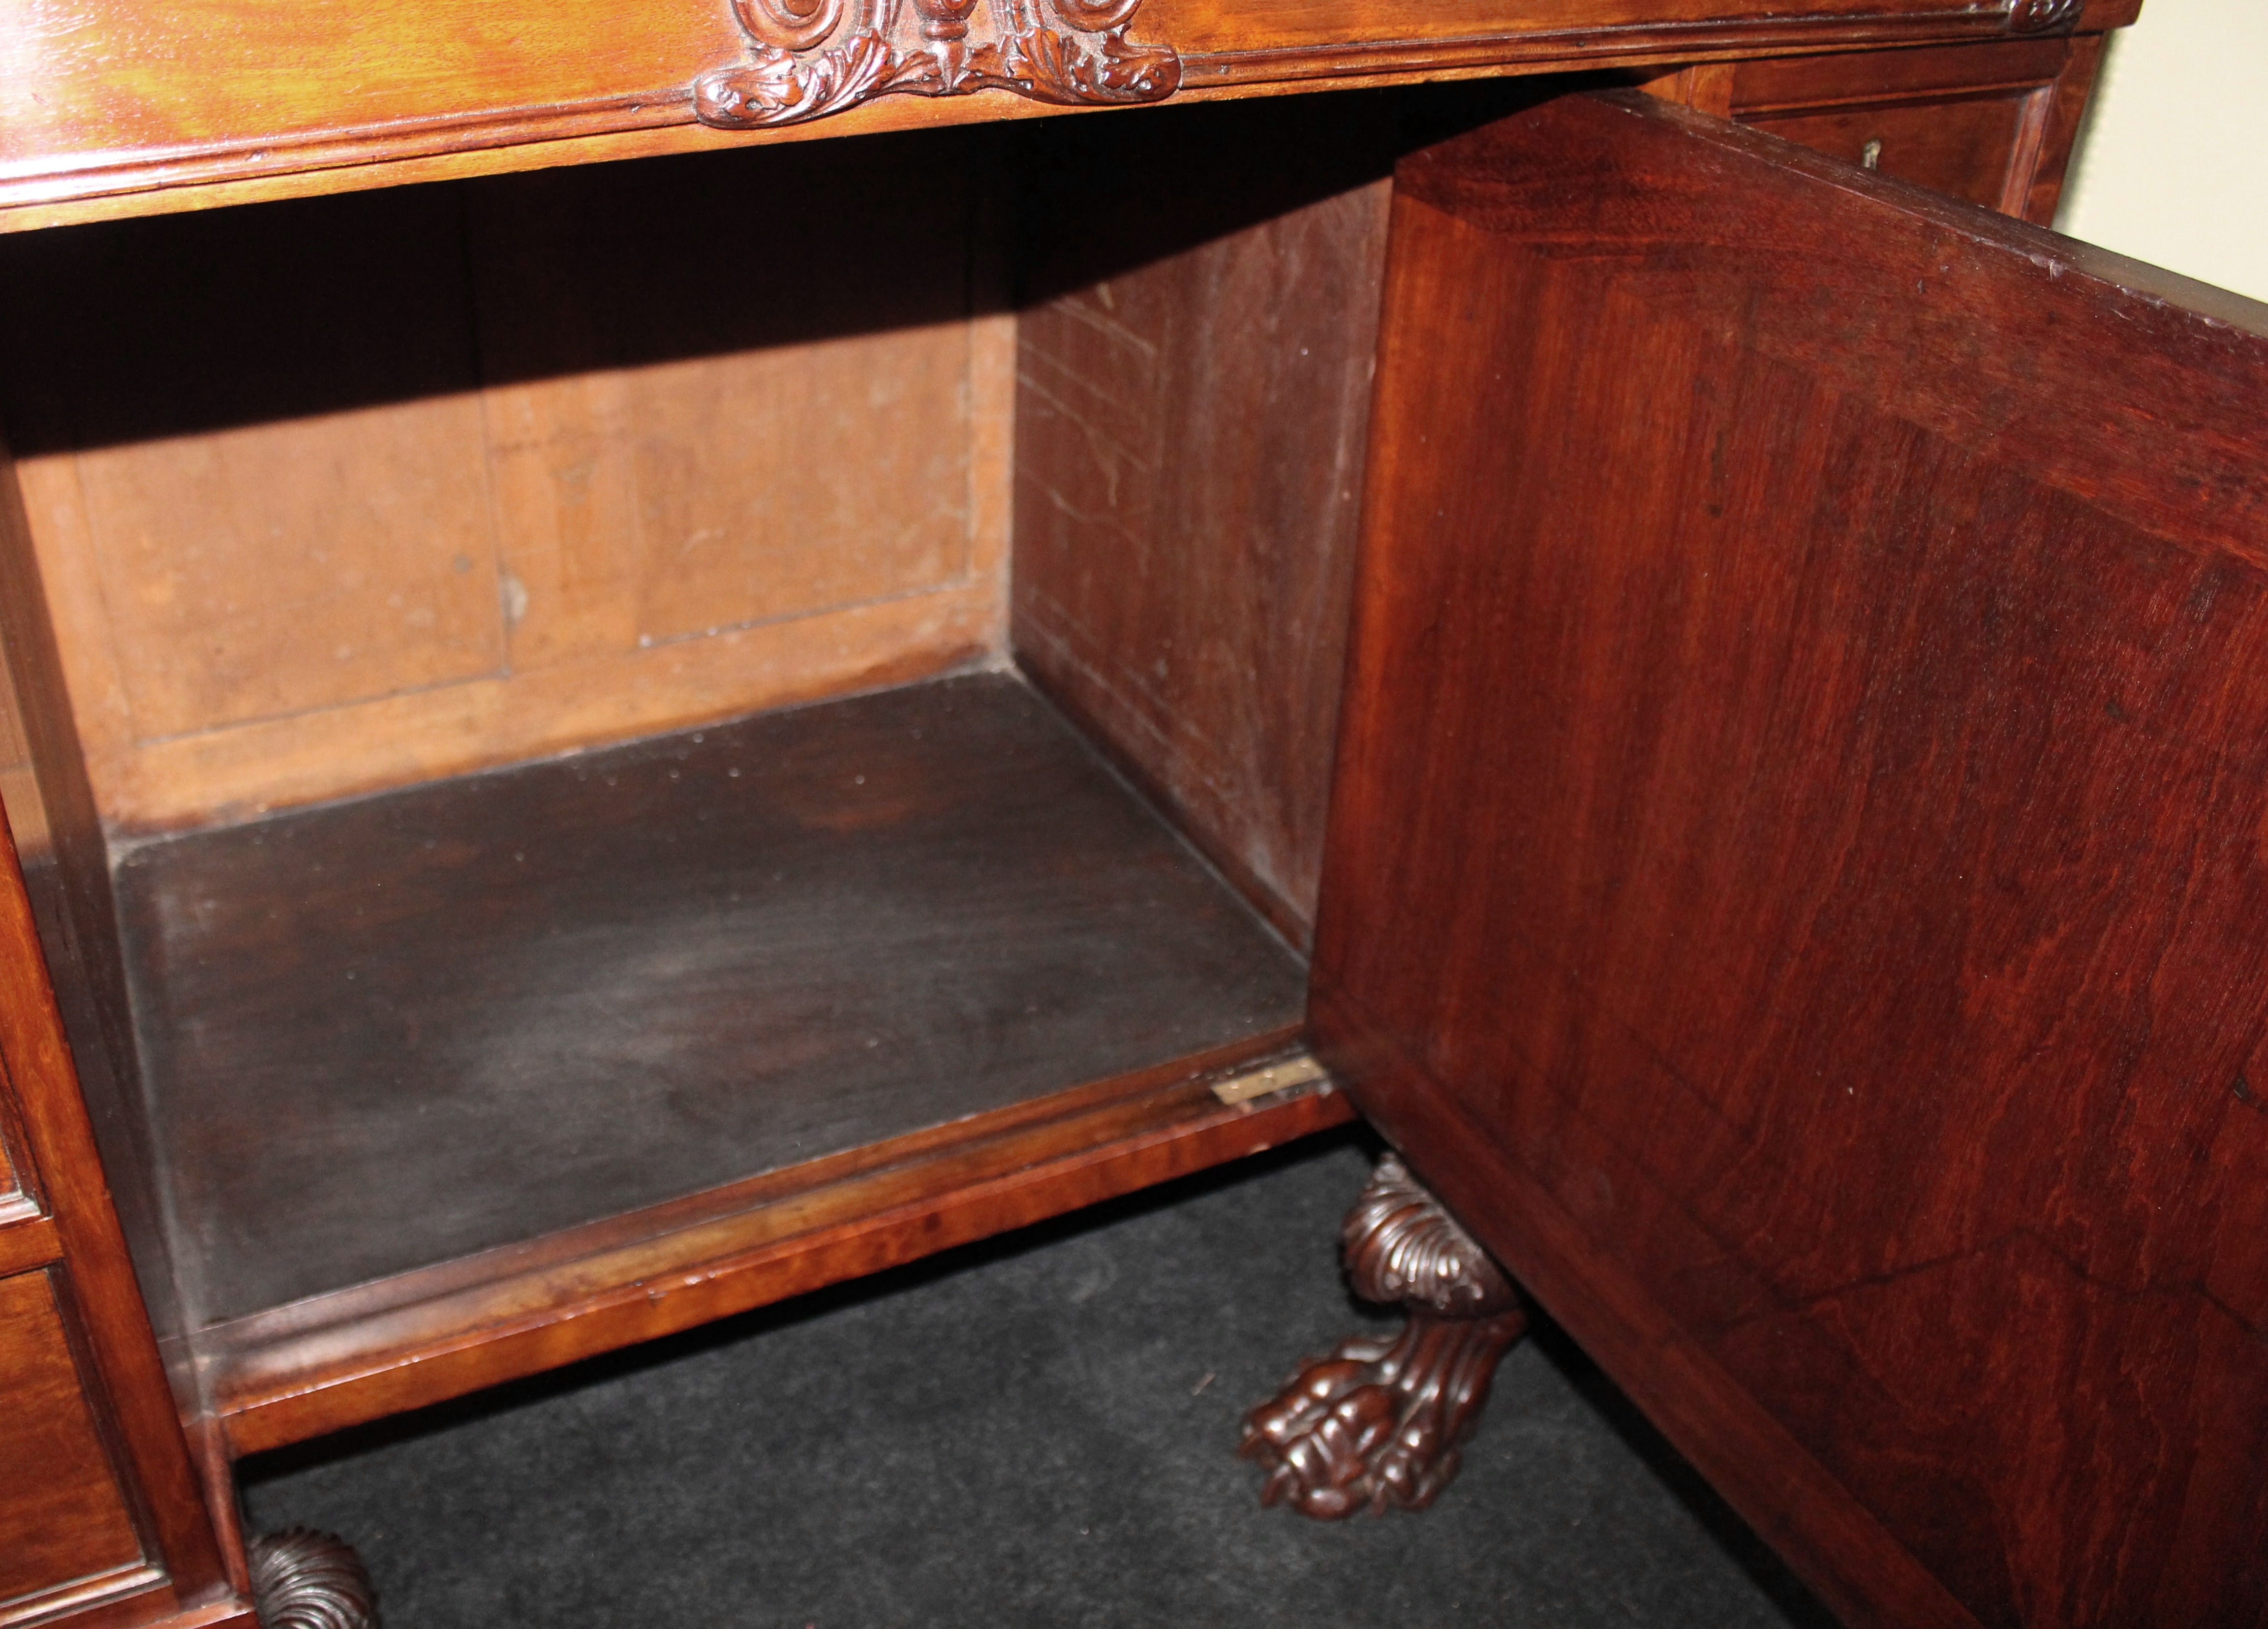 Fine Late 18th c. Mahogany Desk with Carved Feet - Image 3 of 8